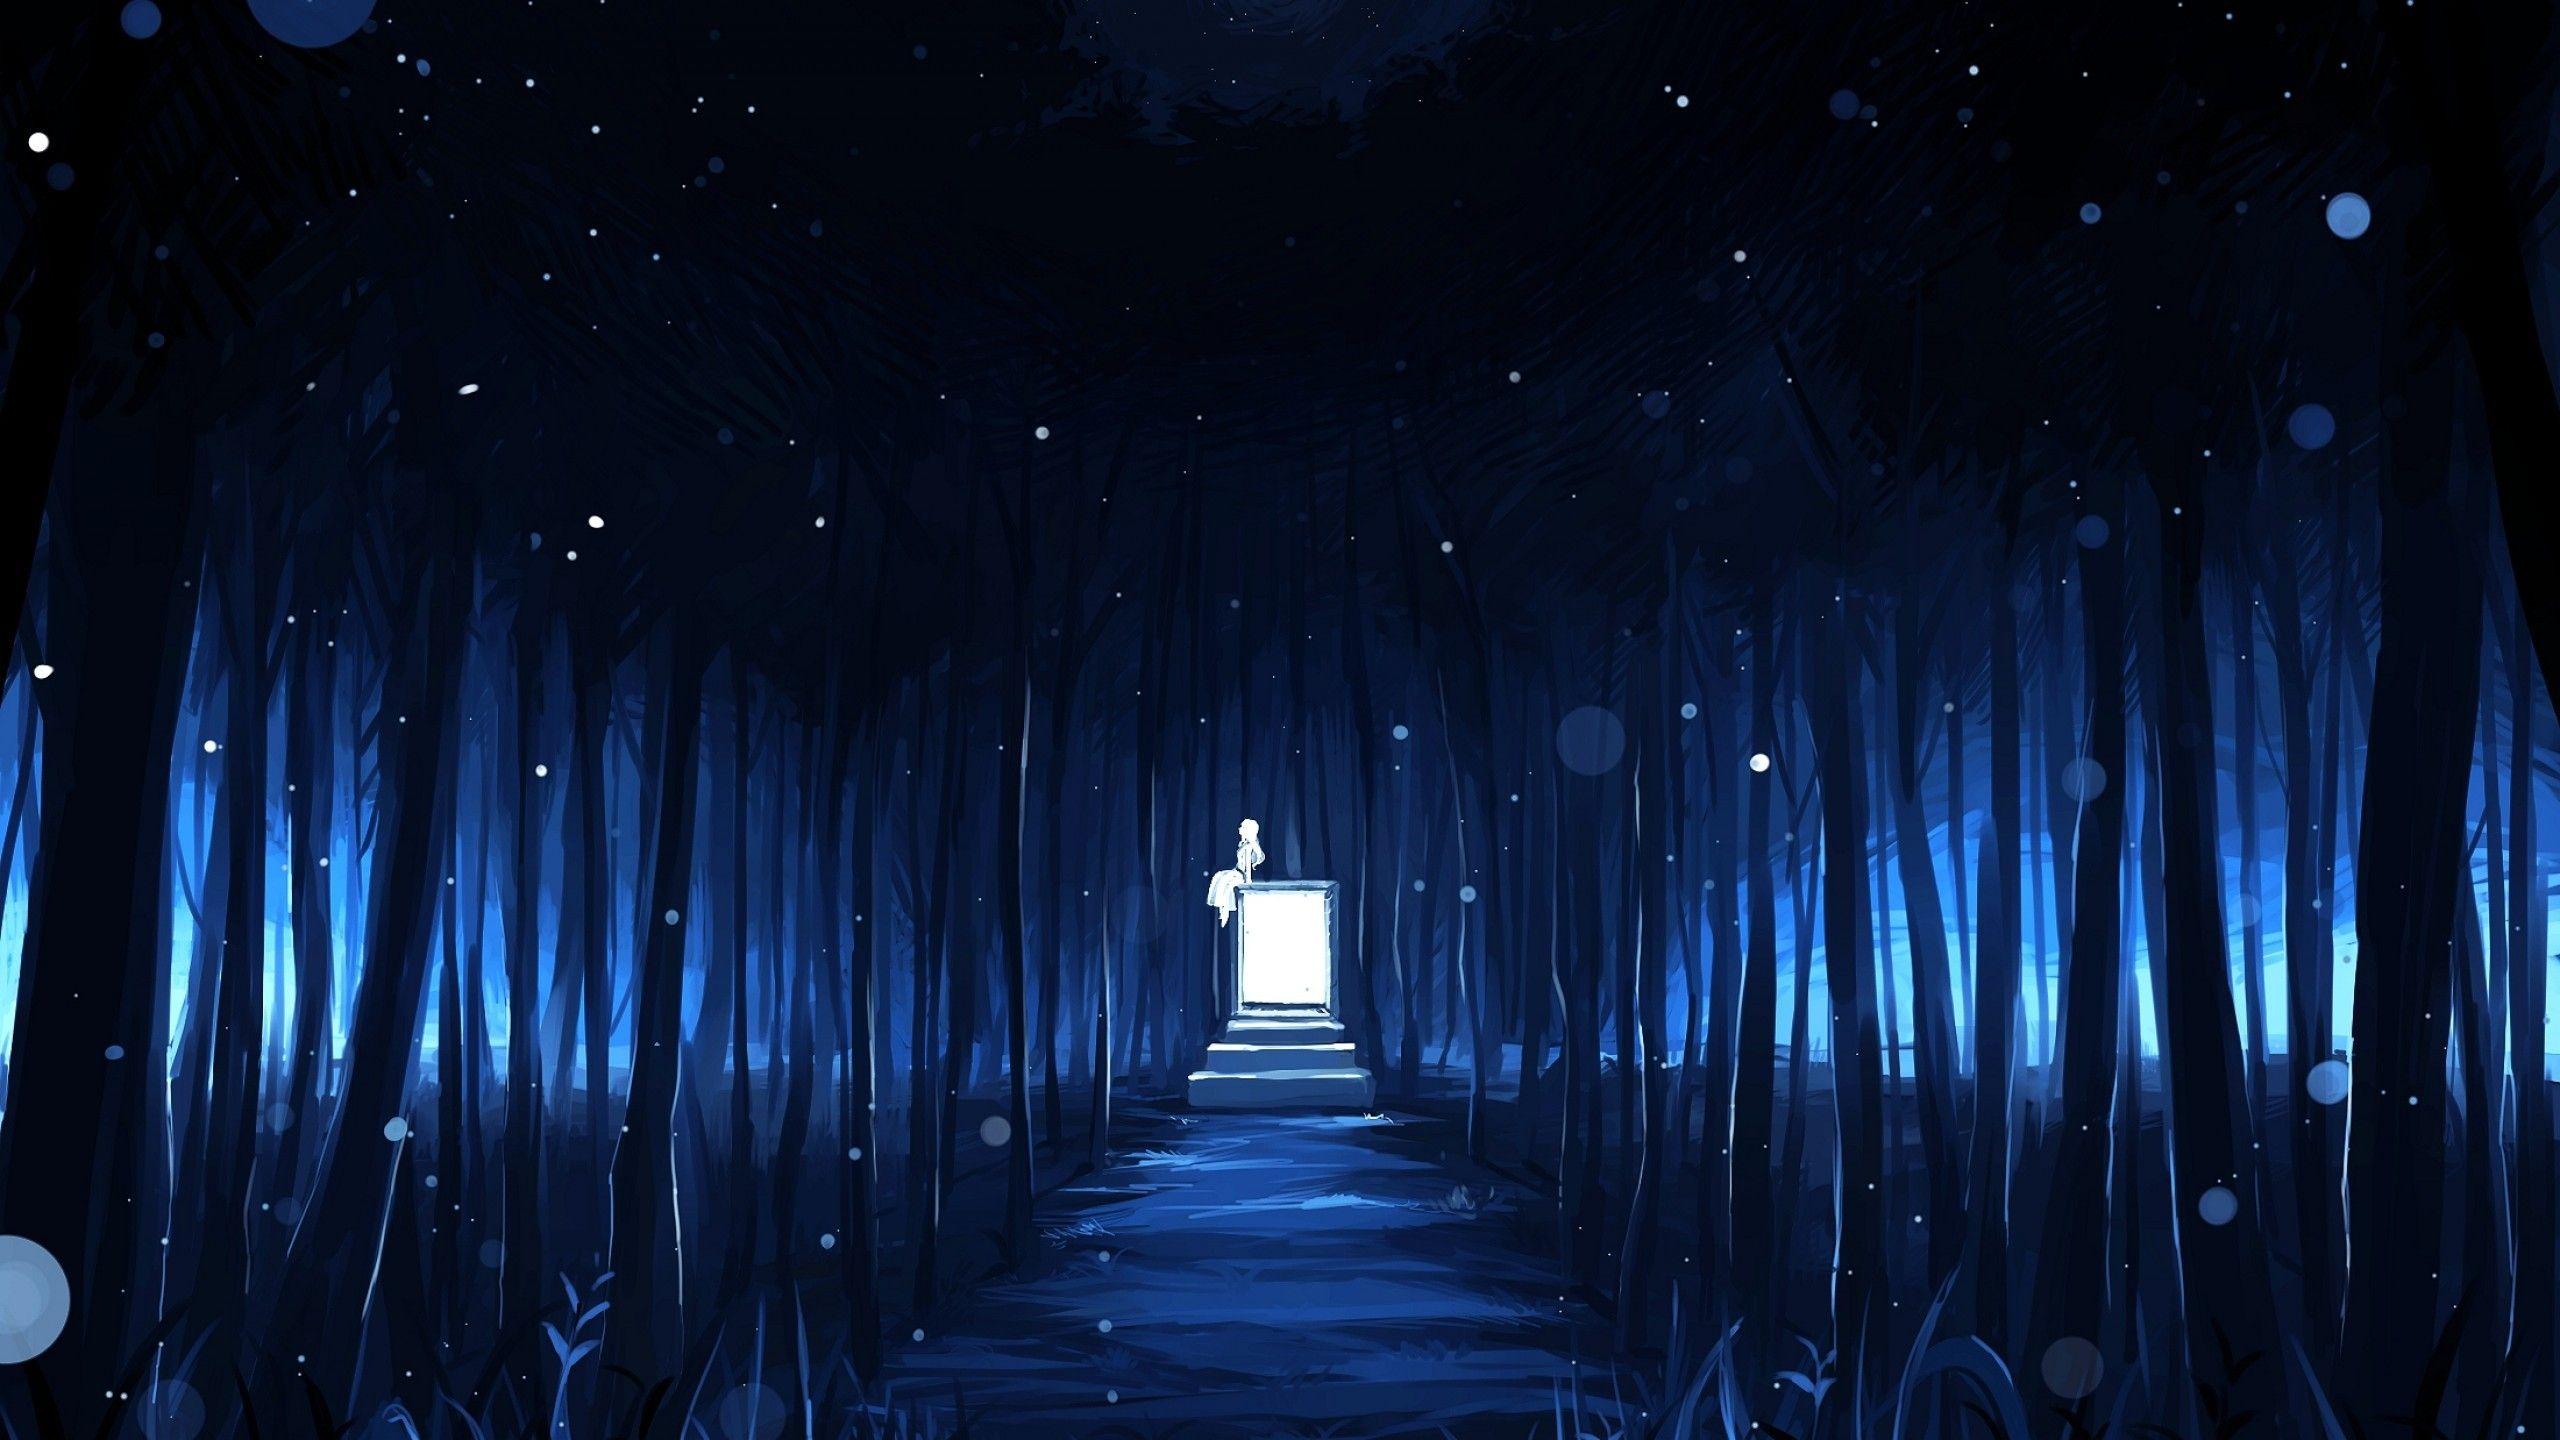 Blue Anime Scenery Wallpapers - Top Free Blue Anime ...